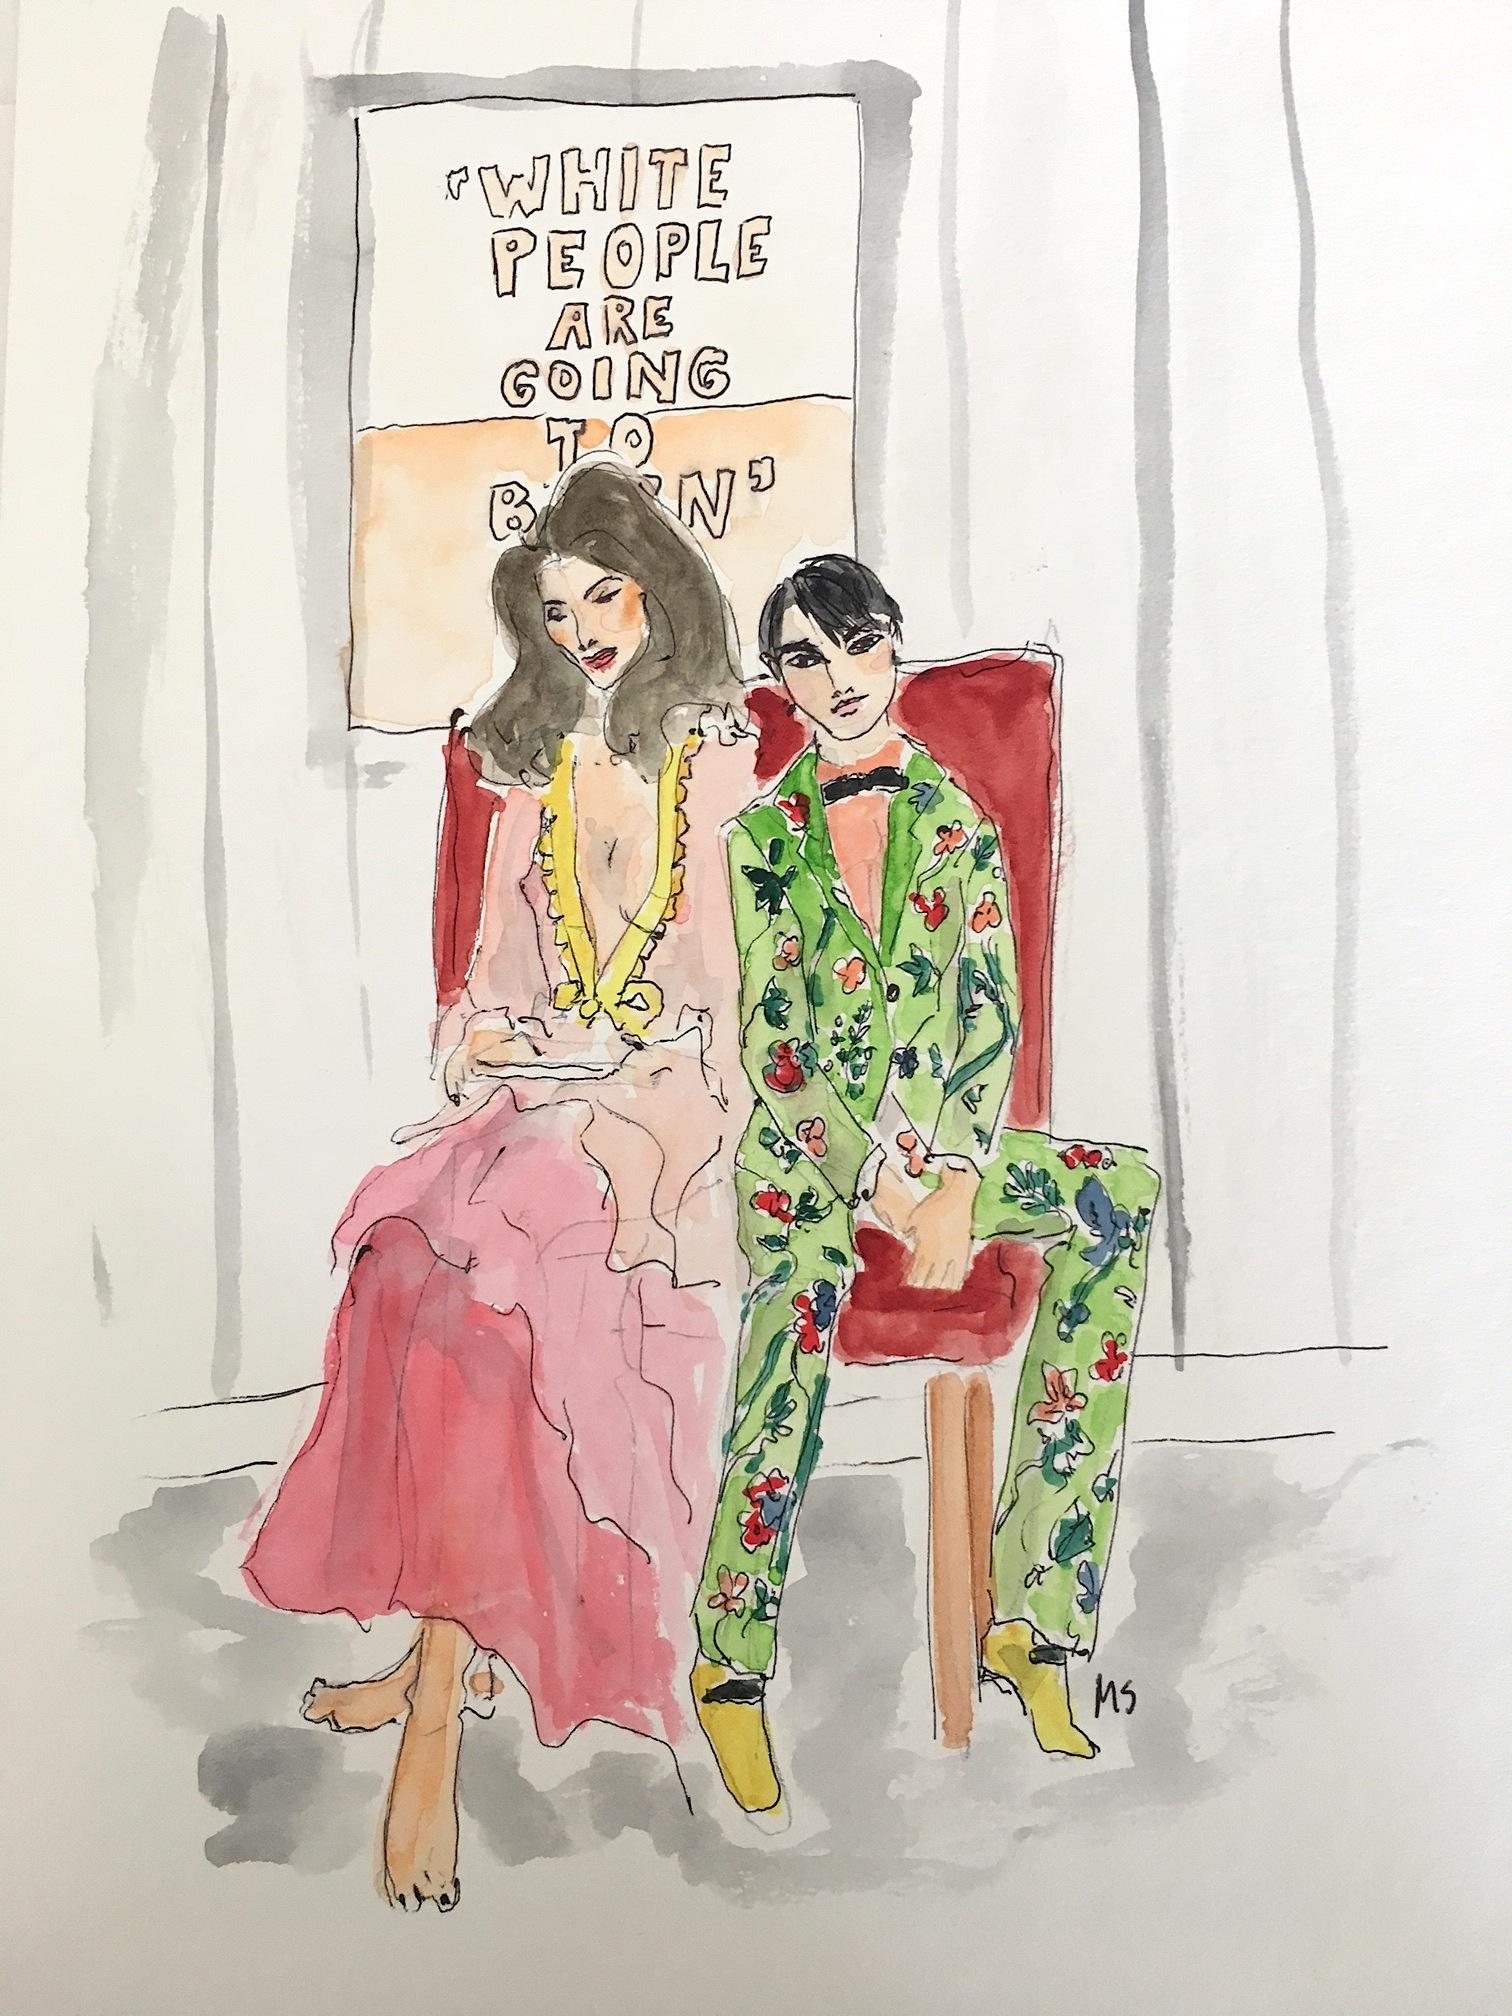 Stephanie Seymour and Harry Brant
Image Size: 11.5 in. H x 8.5 in. W
Watercolor on paper
2017

Framed

Manuel Santelices explores the world of fashion, society, and pop culture through his illustrations. A Chilean artist and journalist living and